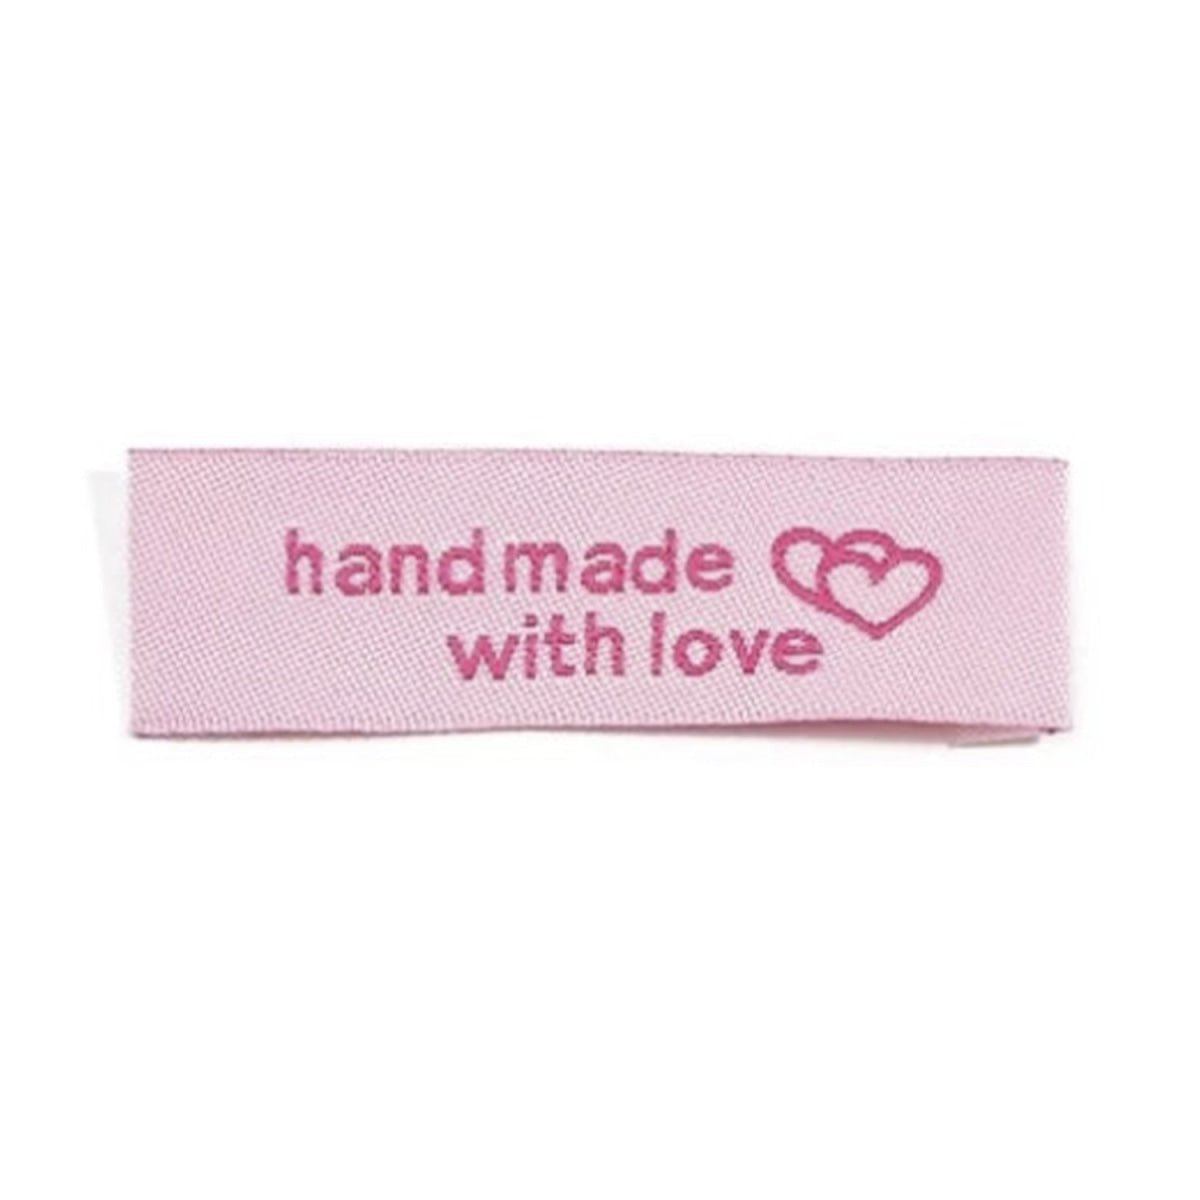 20pcs Sewing Tags Clothing Labels Cloth Fabric "Handmade with Love" Bags DIY - Pink - - Asia Sell